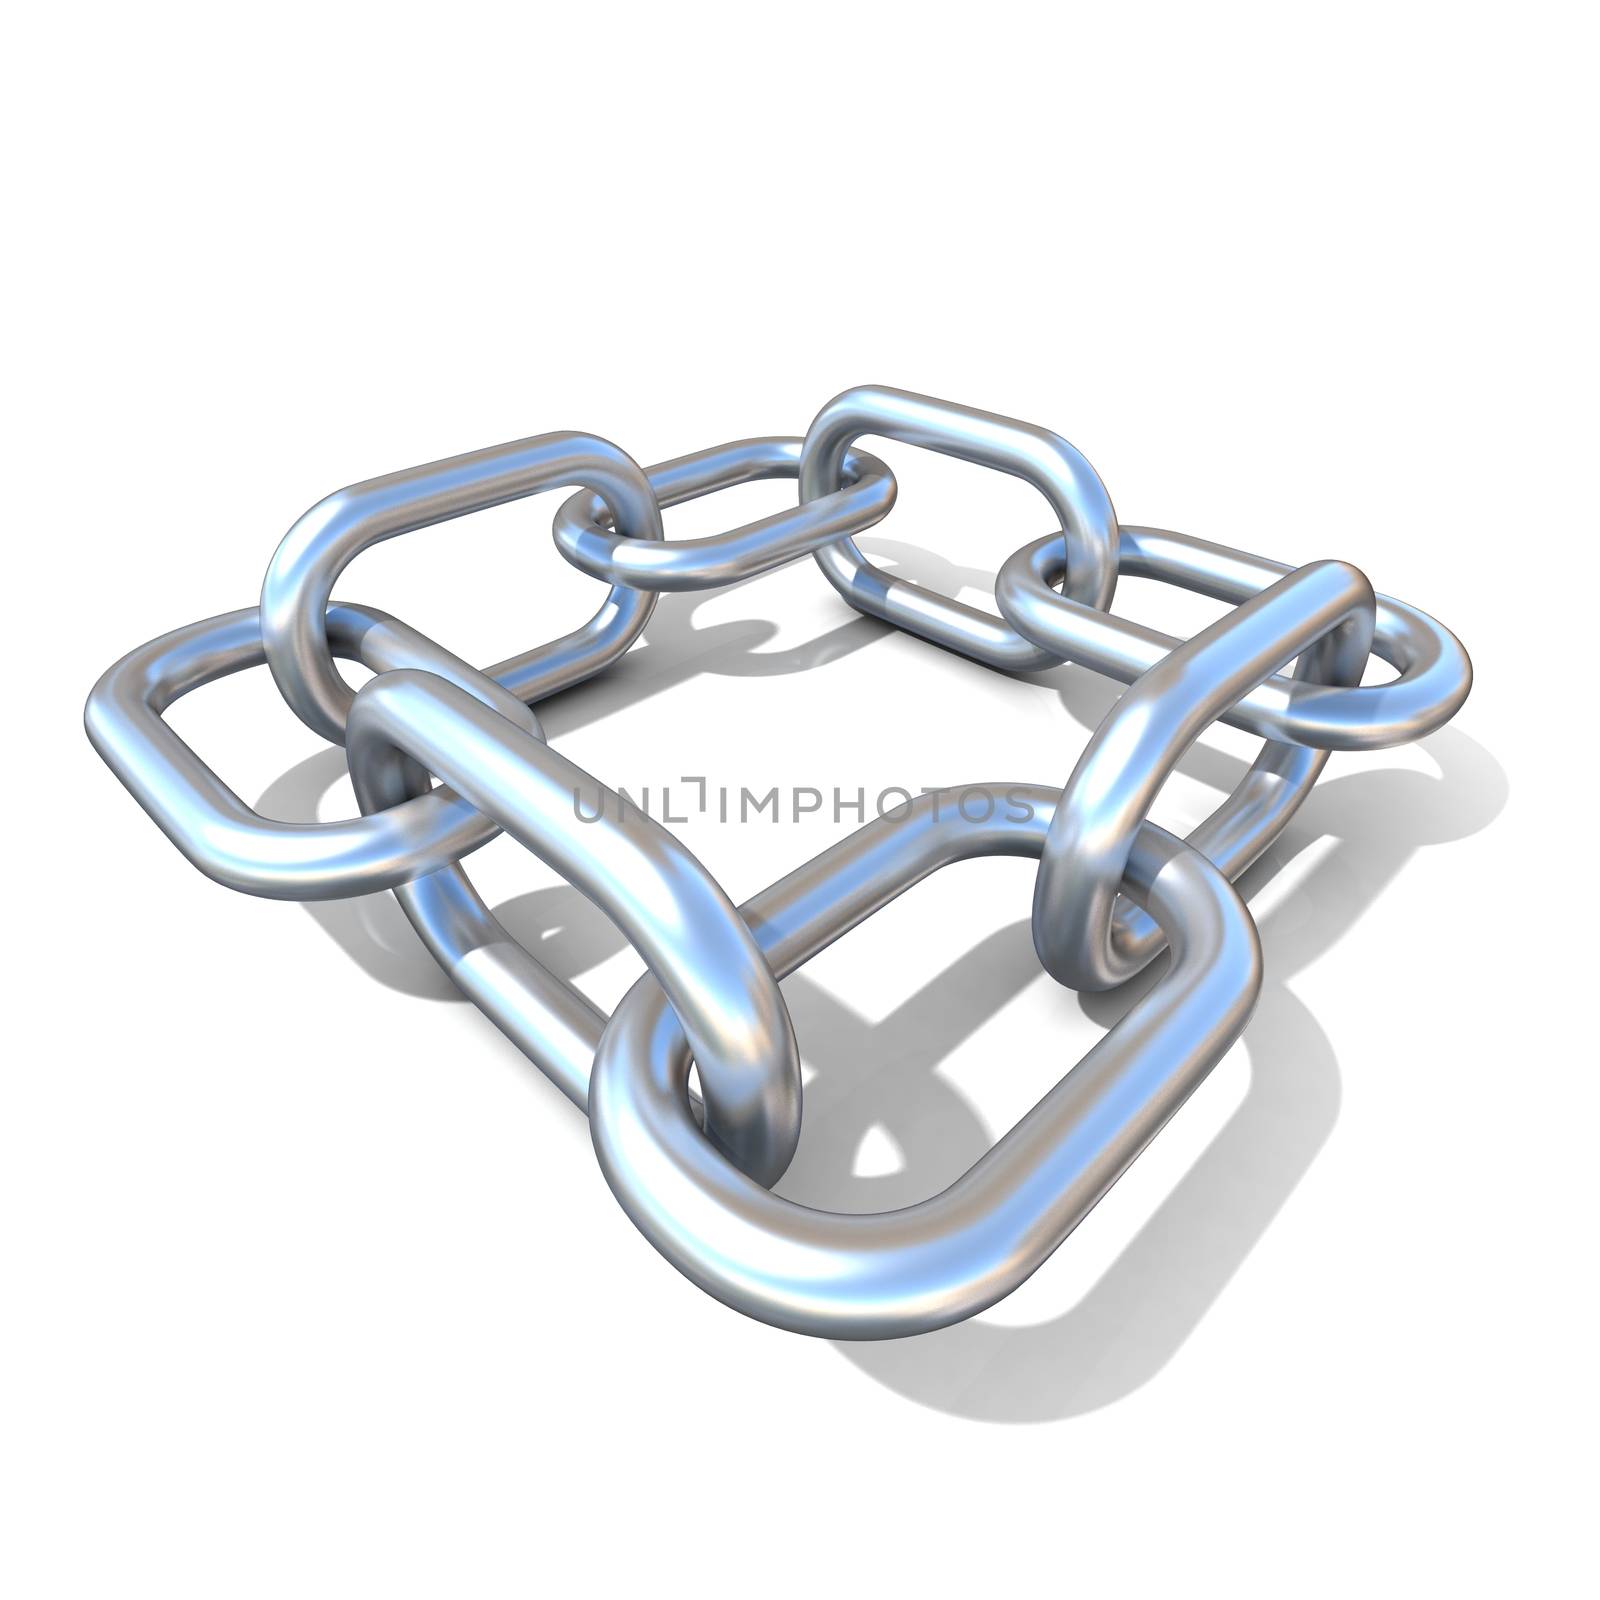 Abstract 3D illustration of a steel chain link isolated on white background. Front view